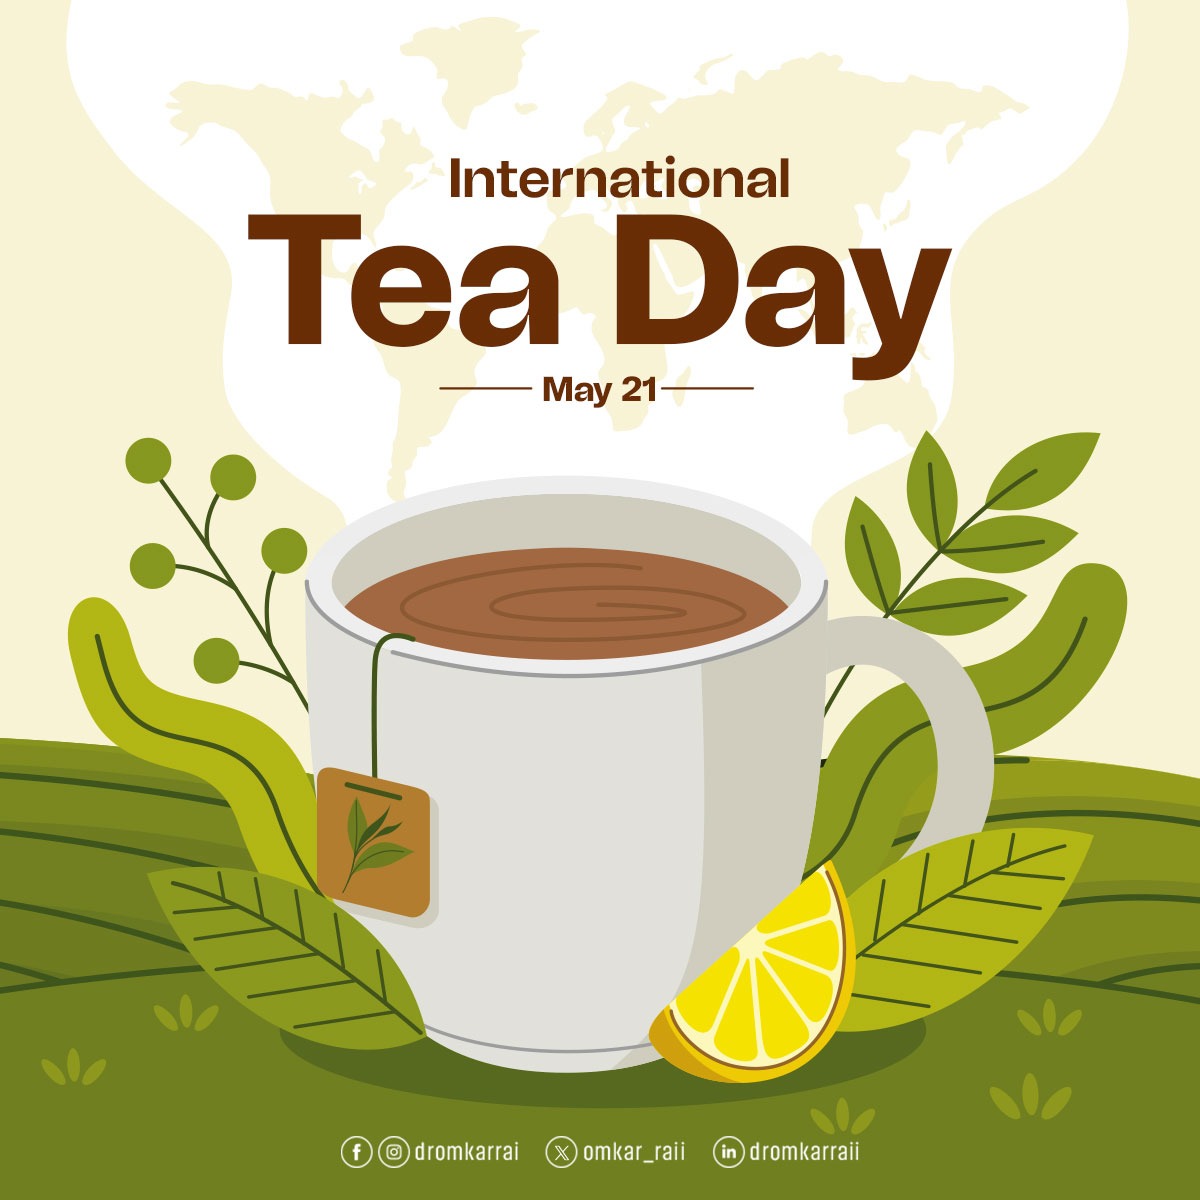 On #InternationalTeaDay, let's emphasize the importance of enjoying our favorite beverage in moderation for better health. Tea contains flavonoids and antioxidants, which are beneficial for the heart and can reduce the risk of several health conditions.